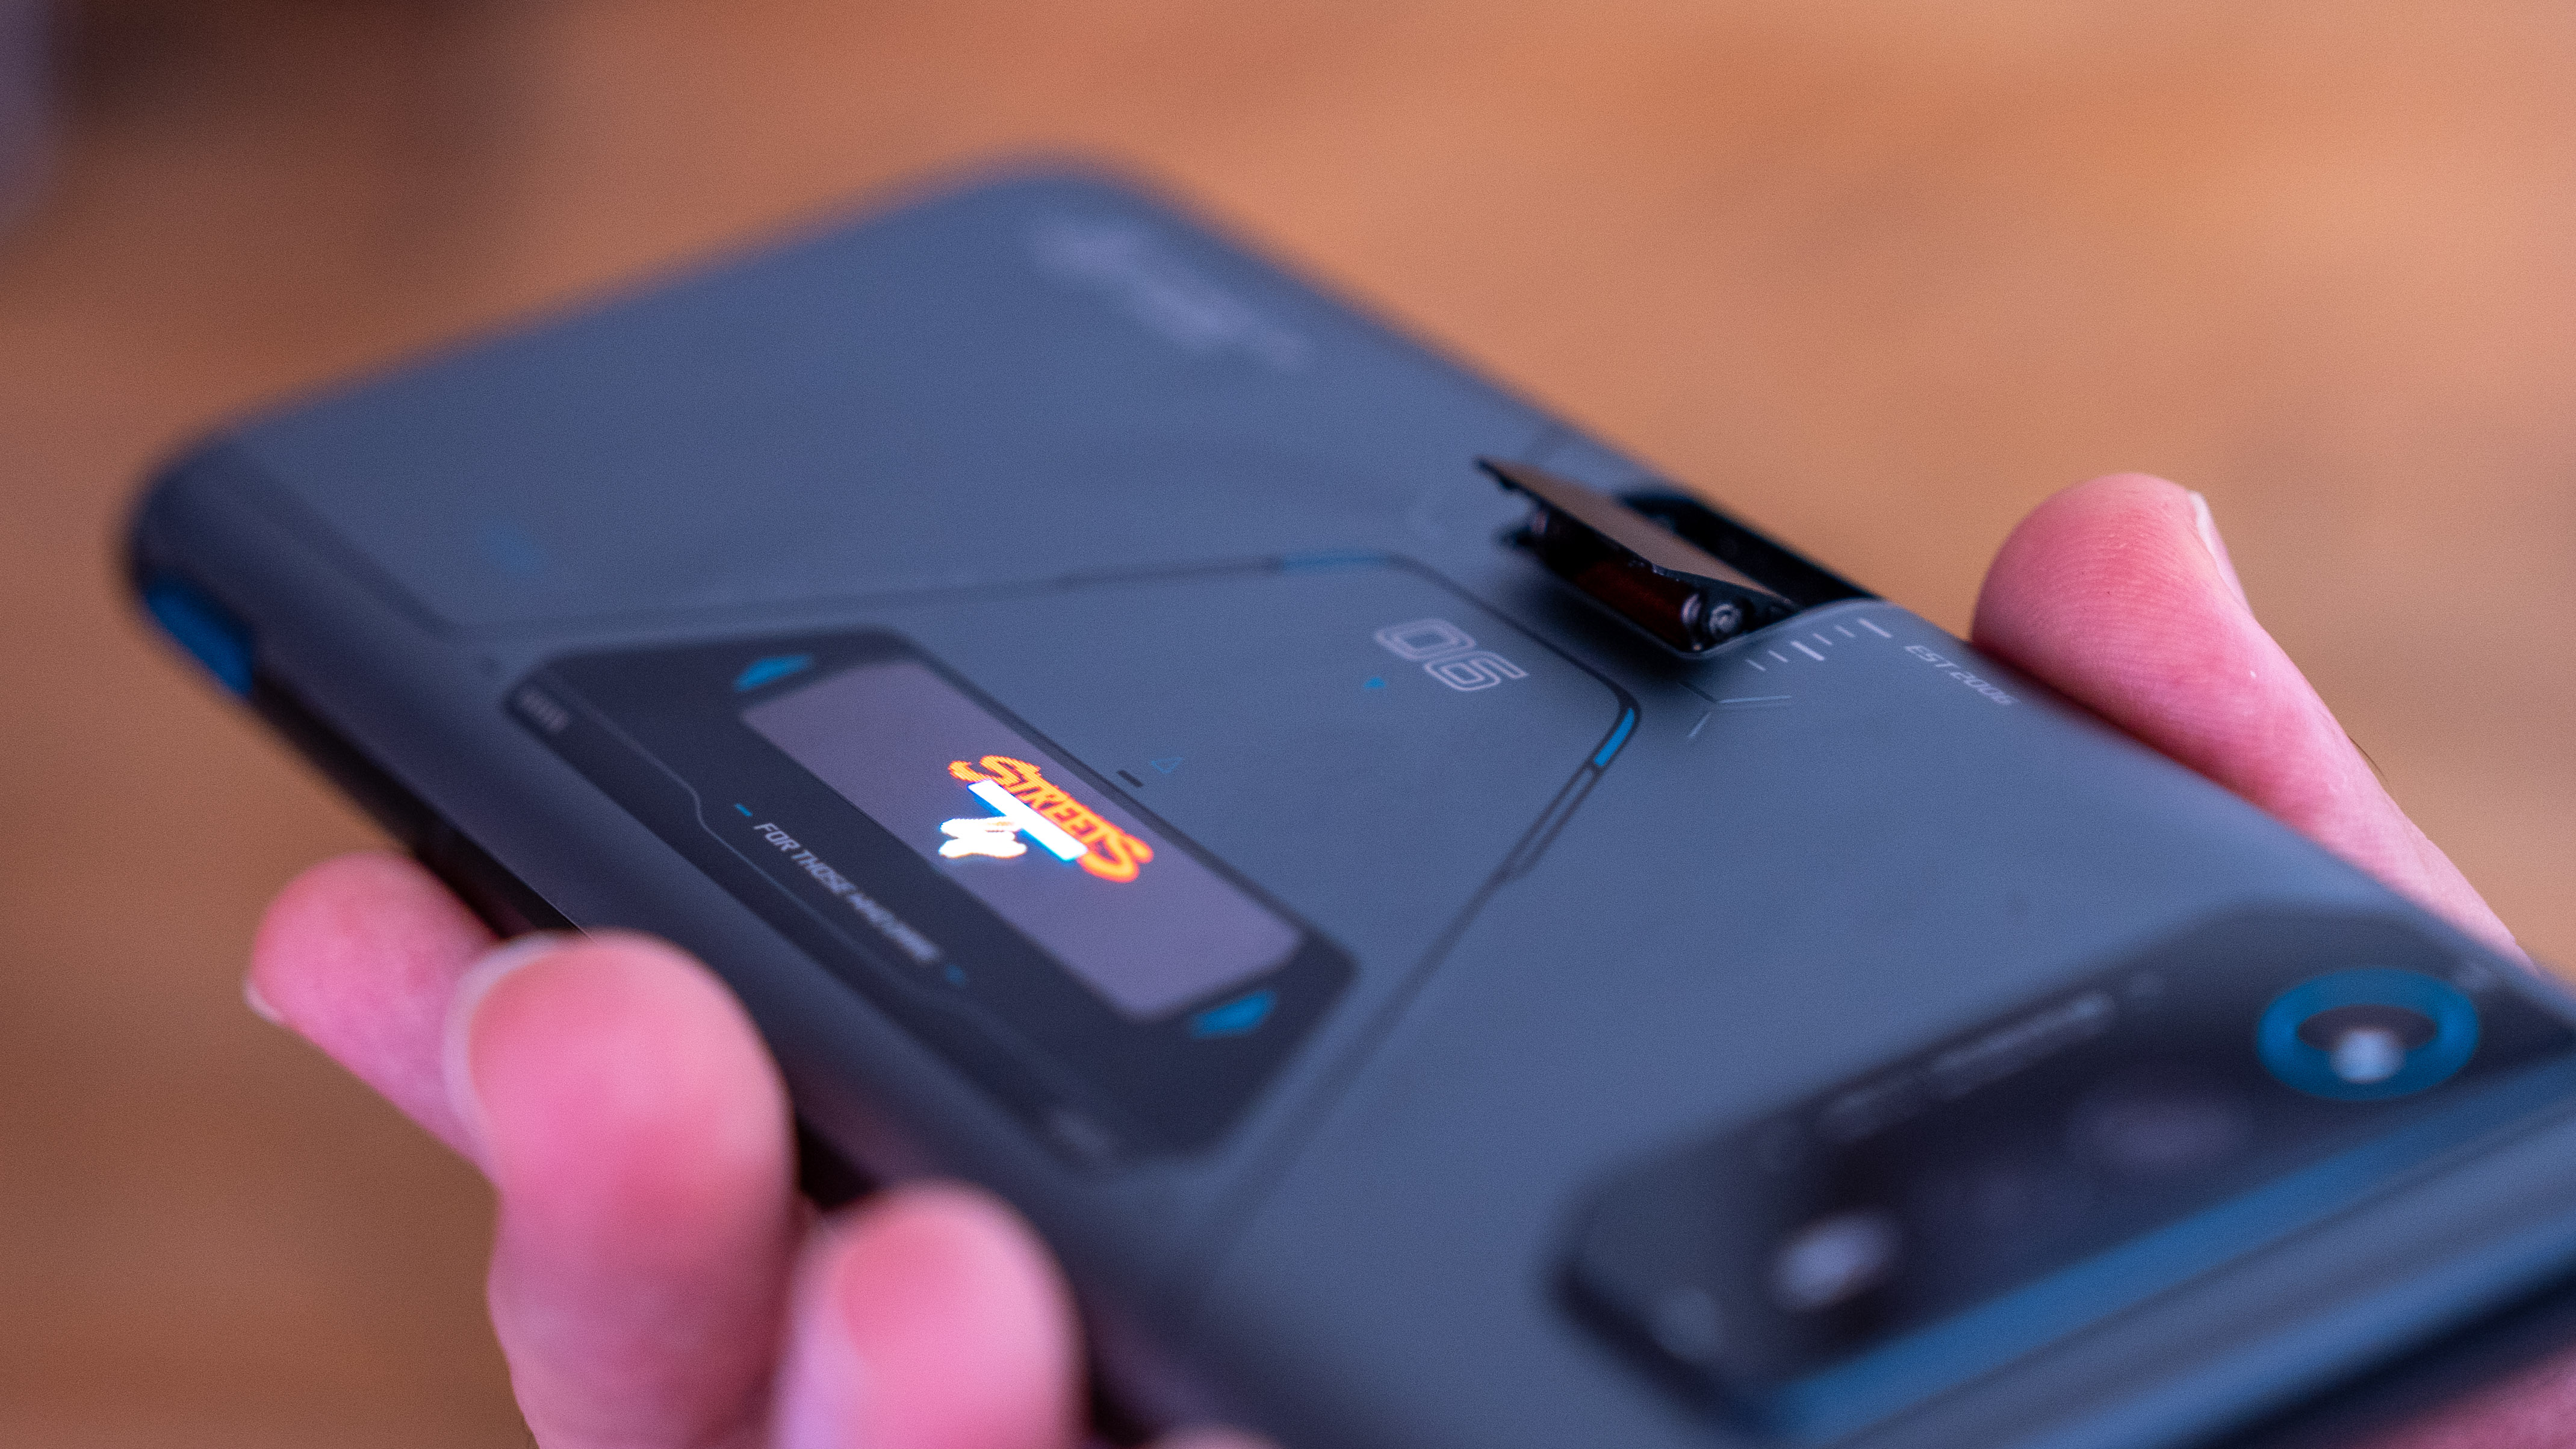 Asus ROG phone 8 Pro review: “This pocket rocket helped me get into mobile  gaming”